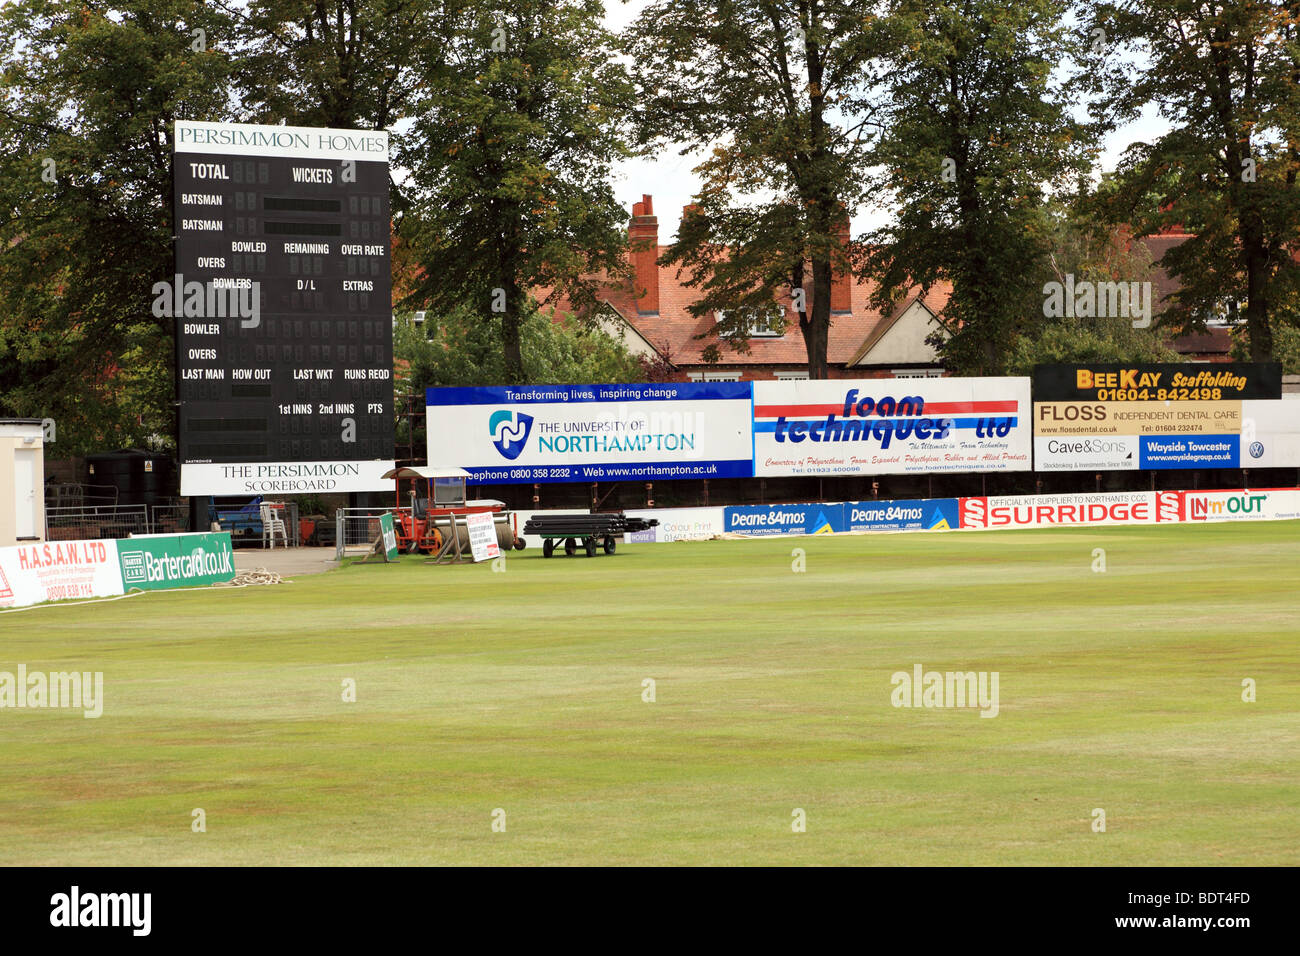 A cricket scoreboard with advertising banners Stock Photo